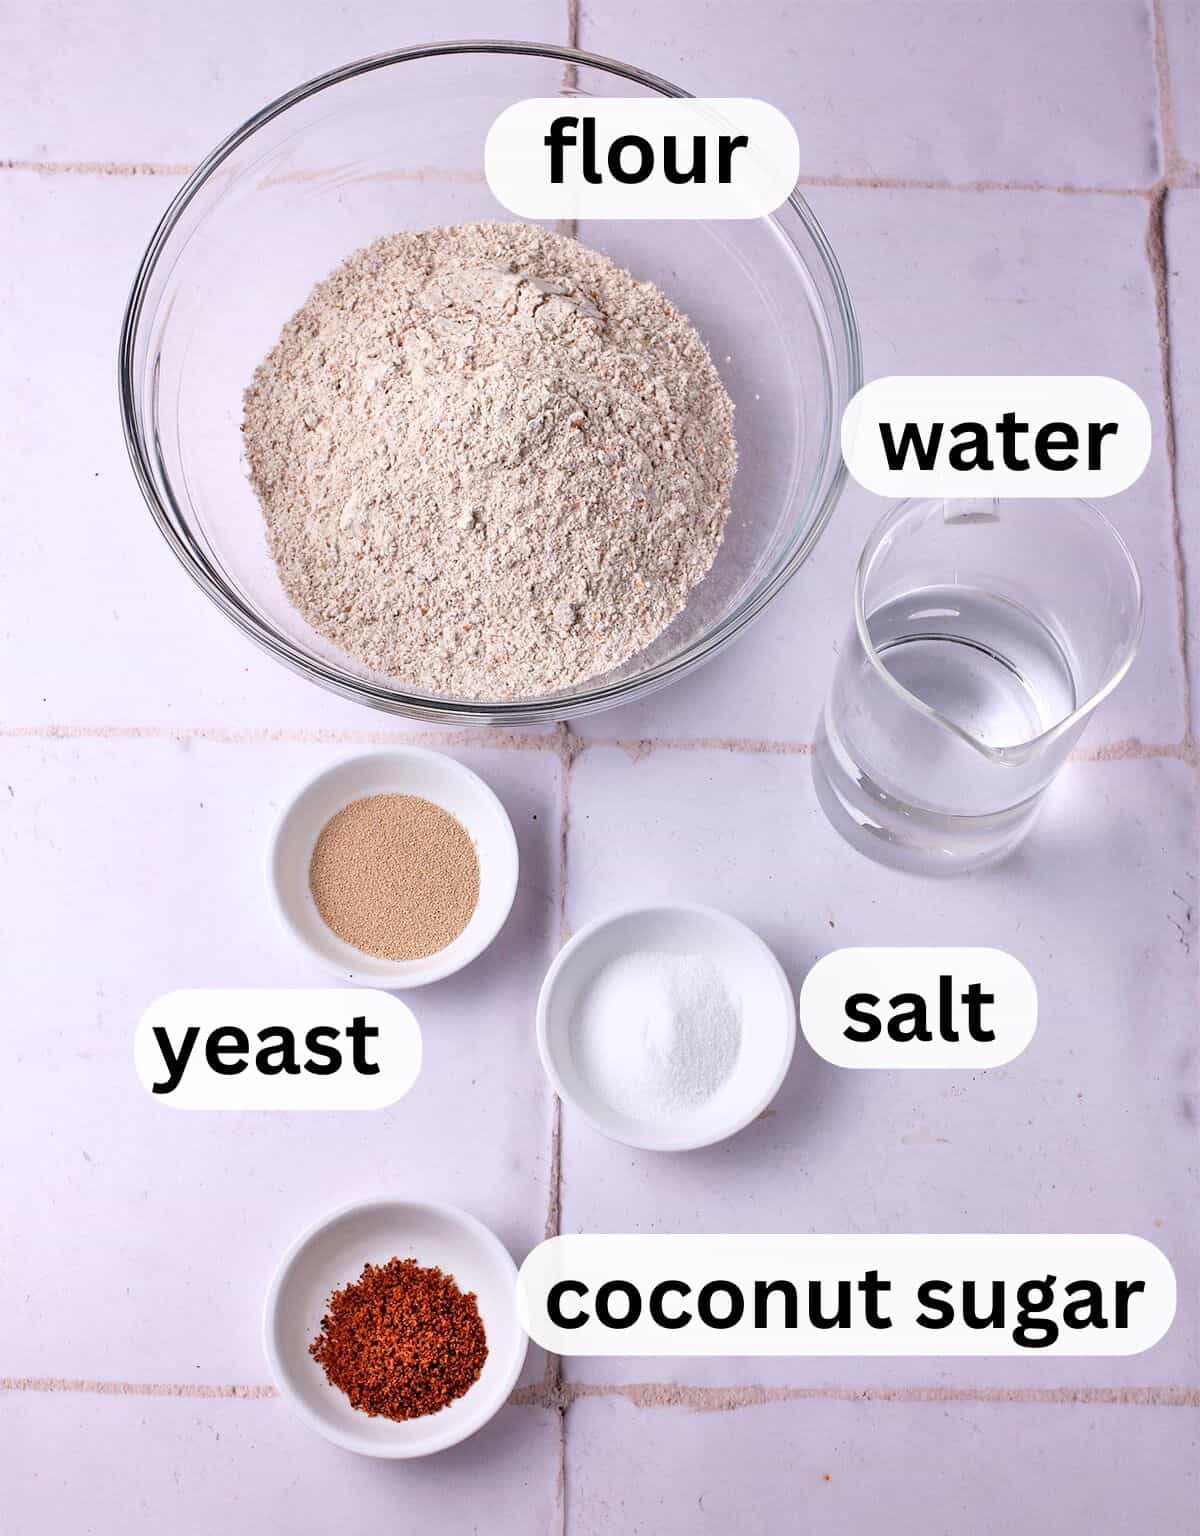 Vegan pizza dough ingredients with labels.